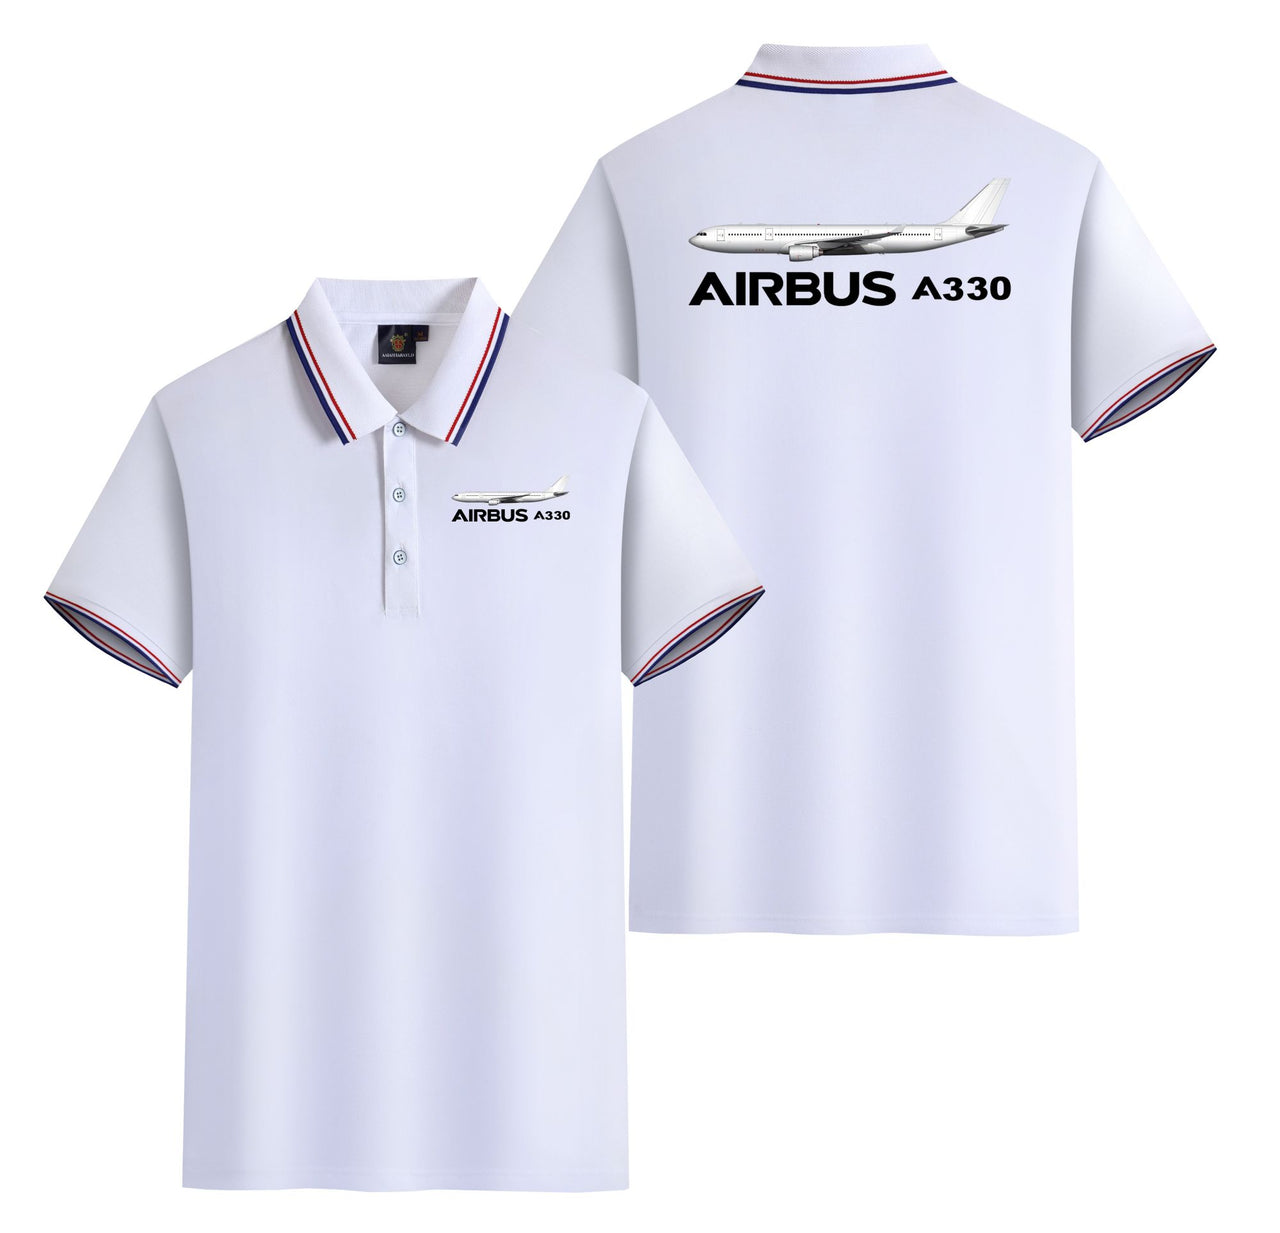 The Airbus A330 Designed Stylish Polo T-Shirts (Double-Side)